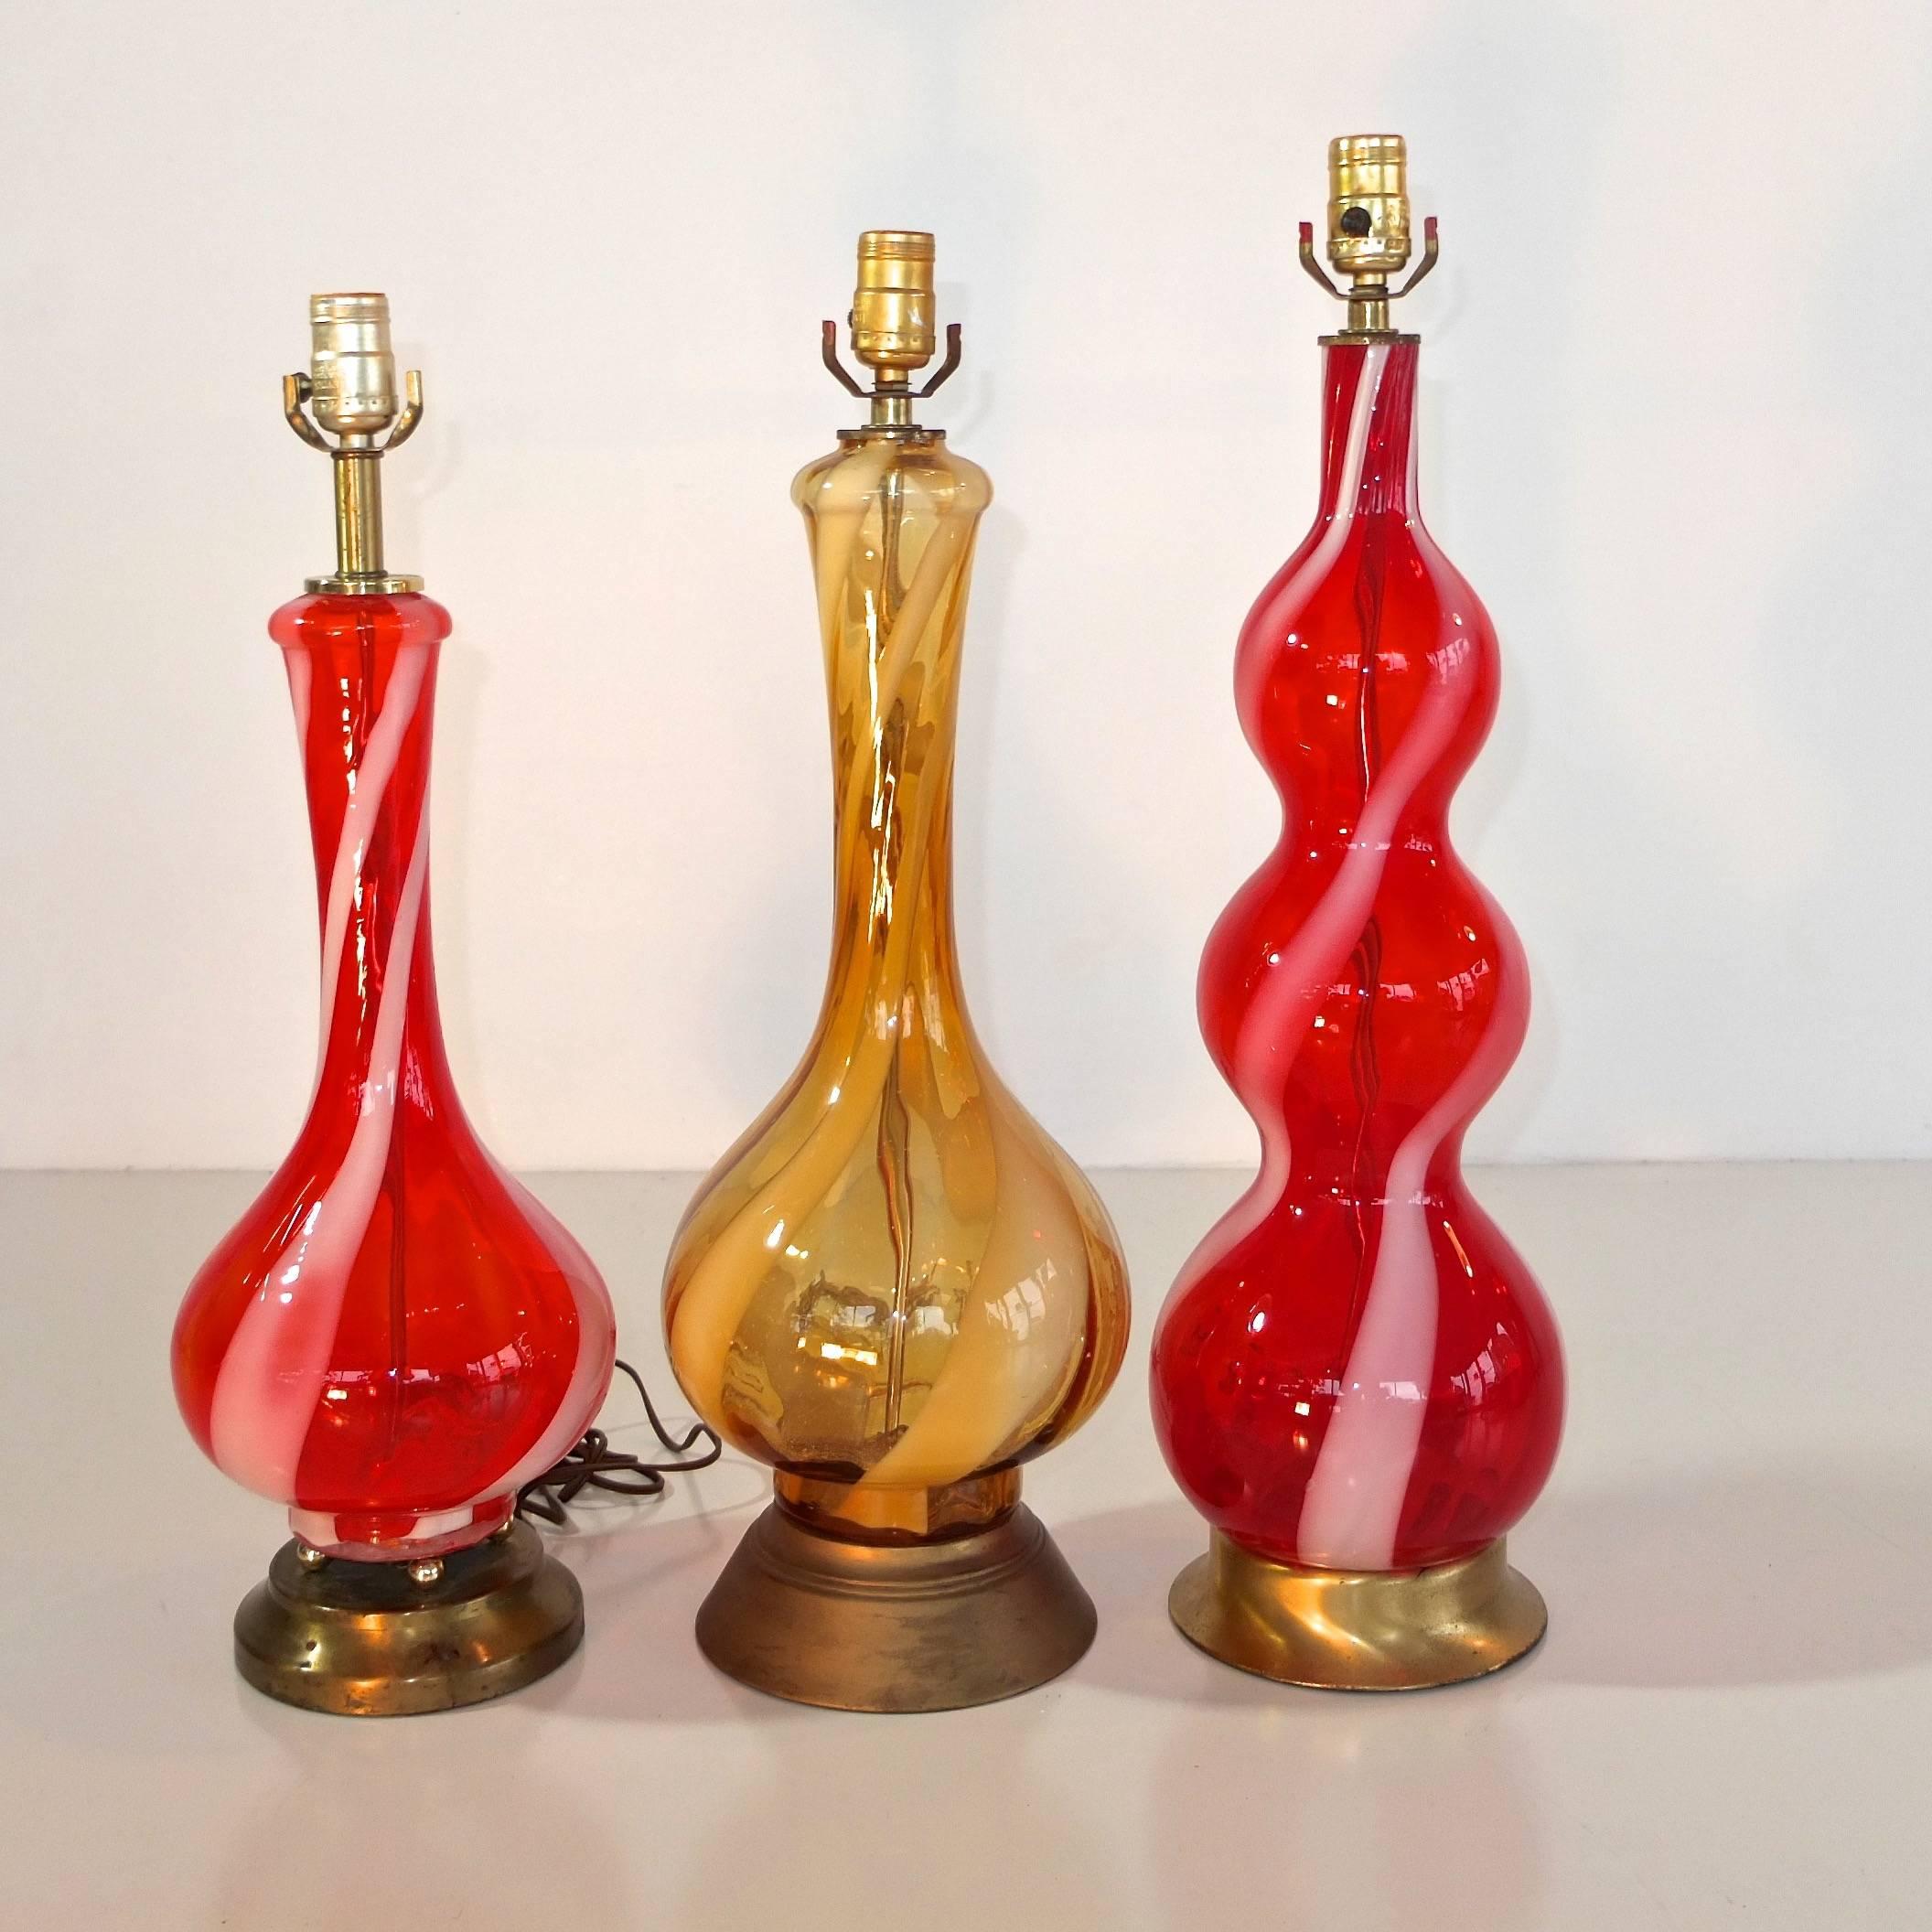 Group of three table lamps, 1960s Murano glass, attributed to Salviati. Two are red glass with white candy swirl. One is yellow-amber with white candy swirl.

Price shown is for the three lamps as shown. 

By request we can re-build these gorgeous